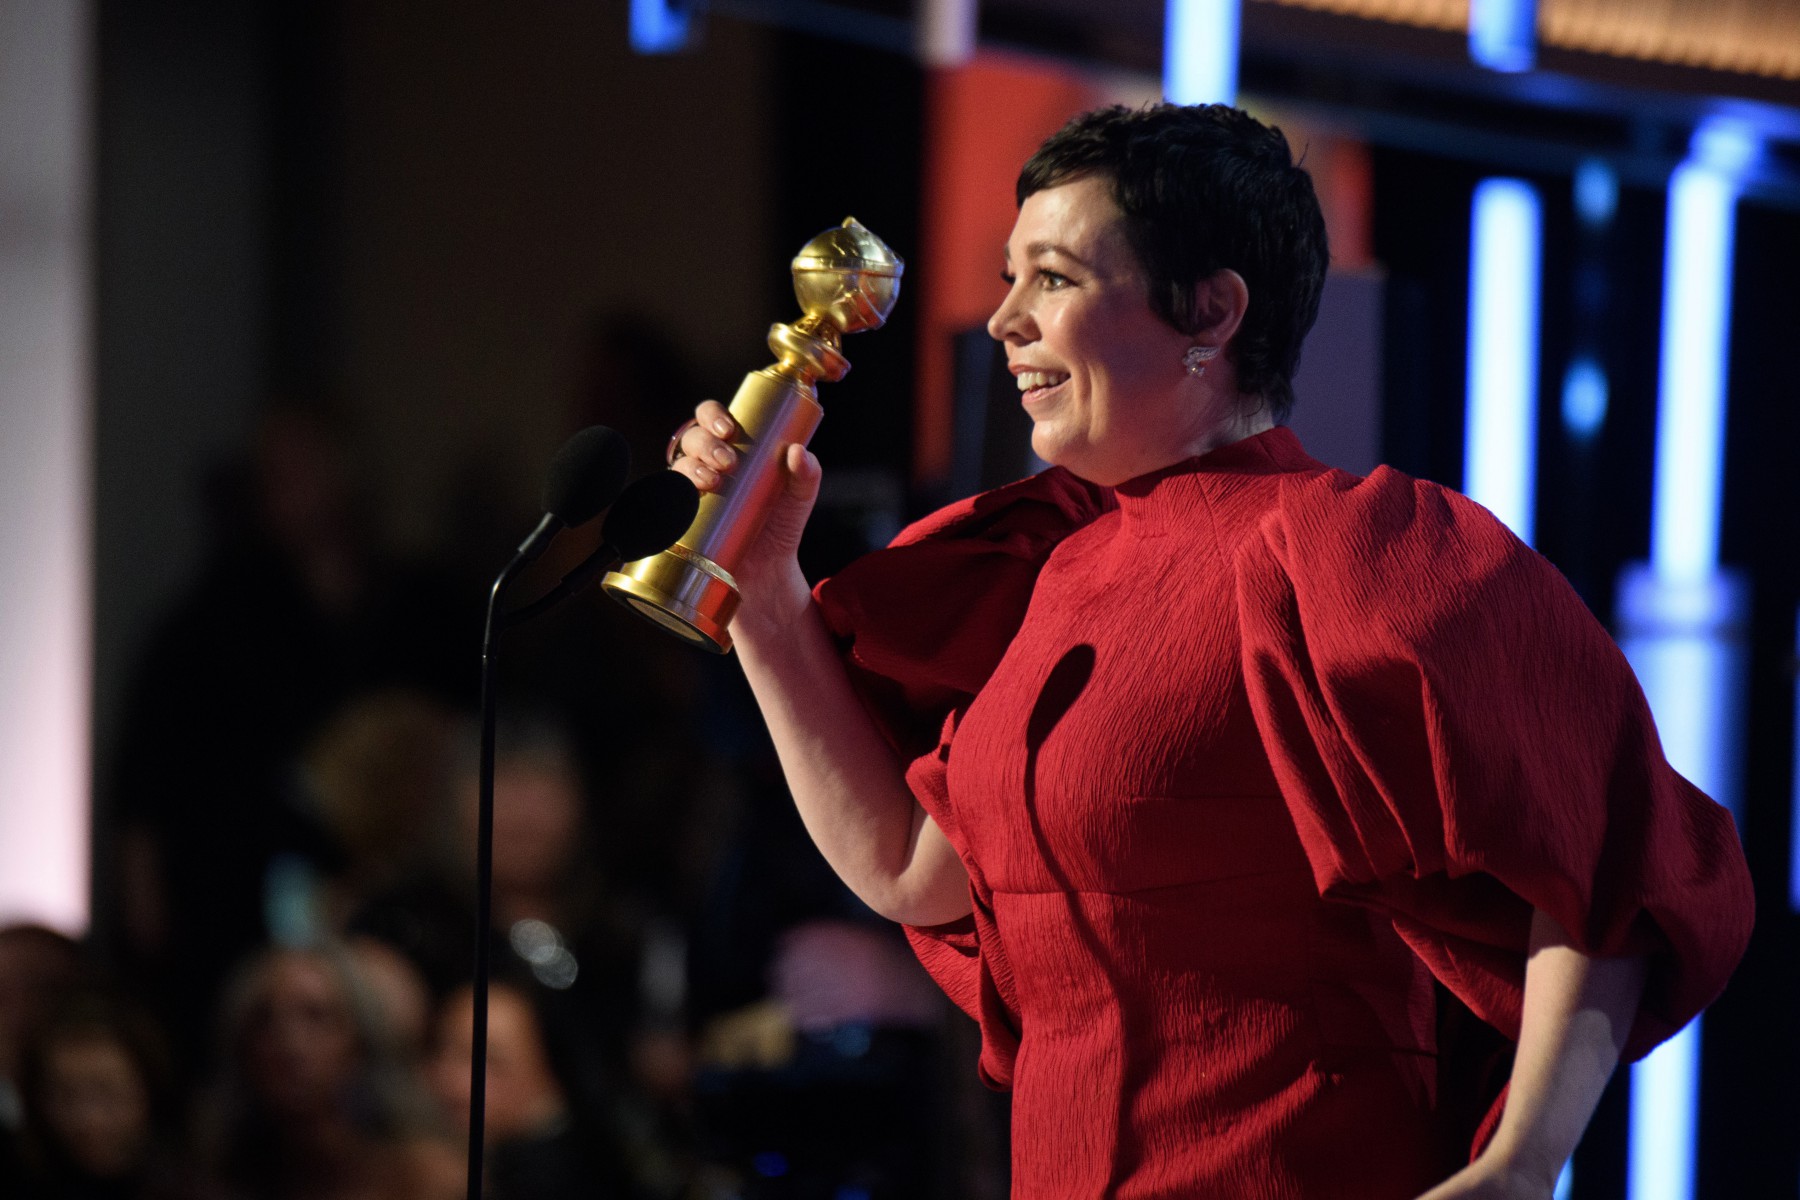 Olivia Colman admitted she was already 'a little bit boozy' during her speech